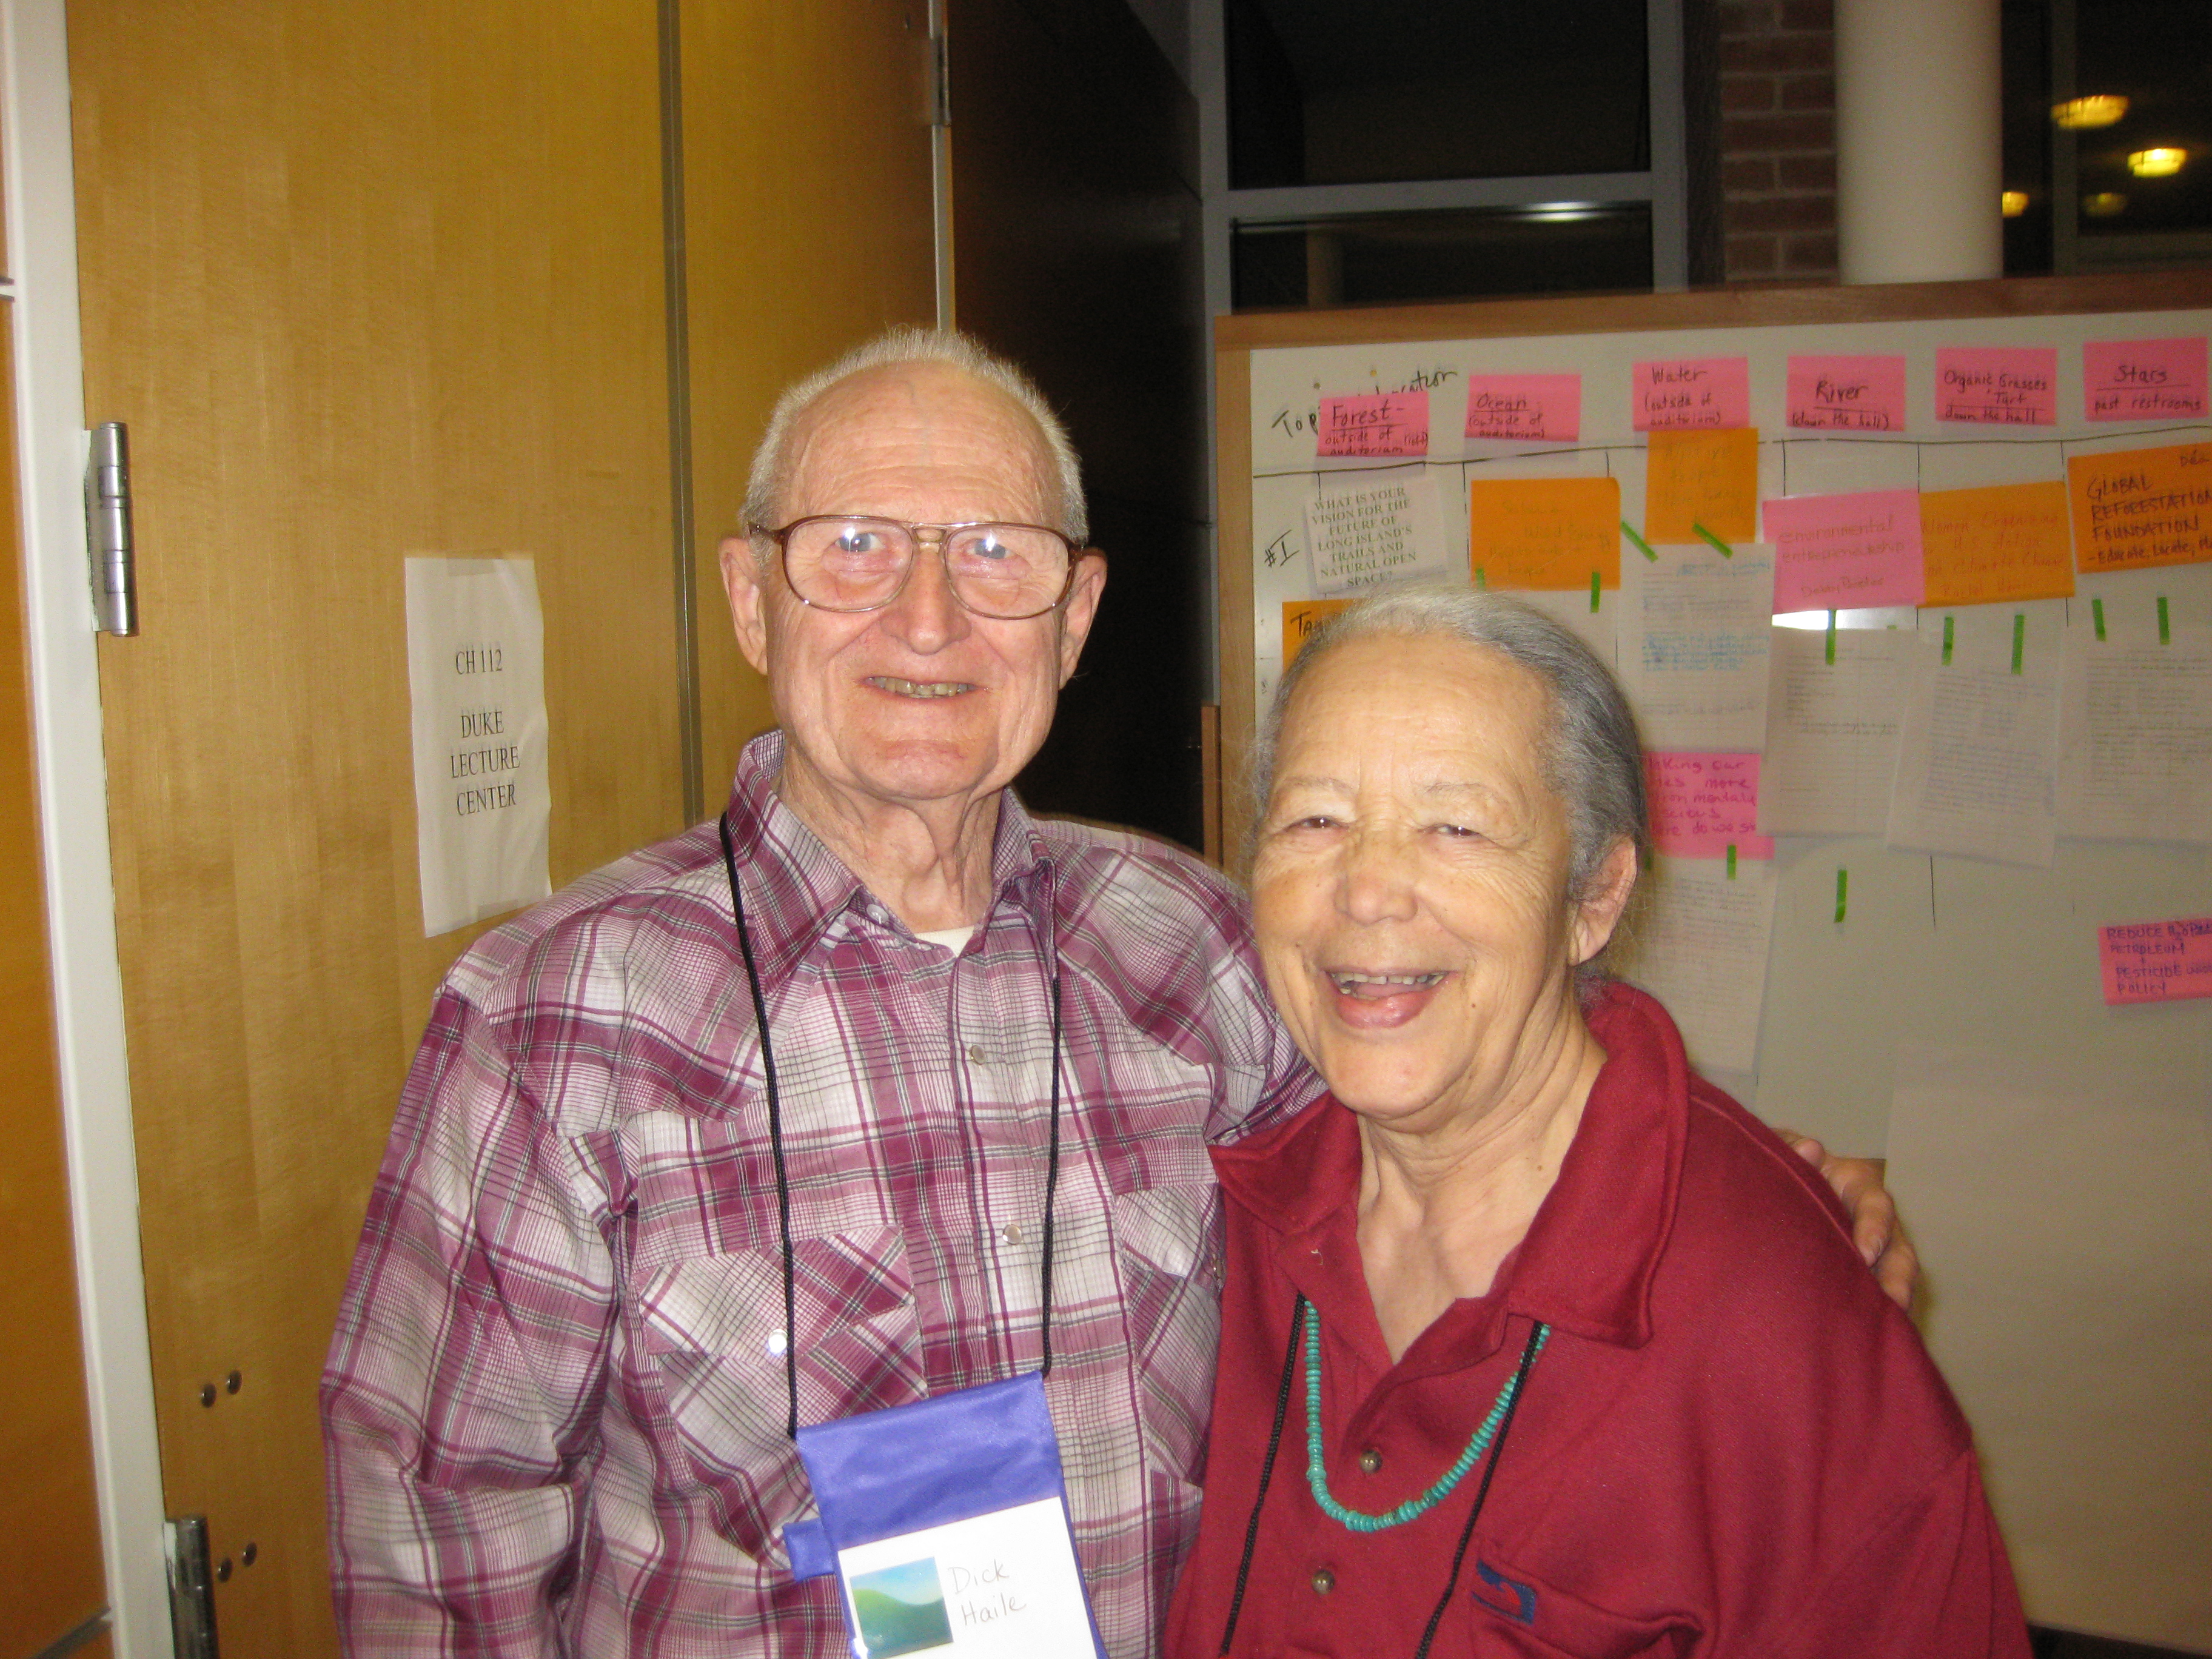 Dick and Bess Haile. 2009